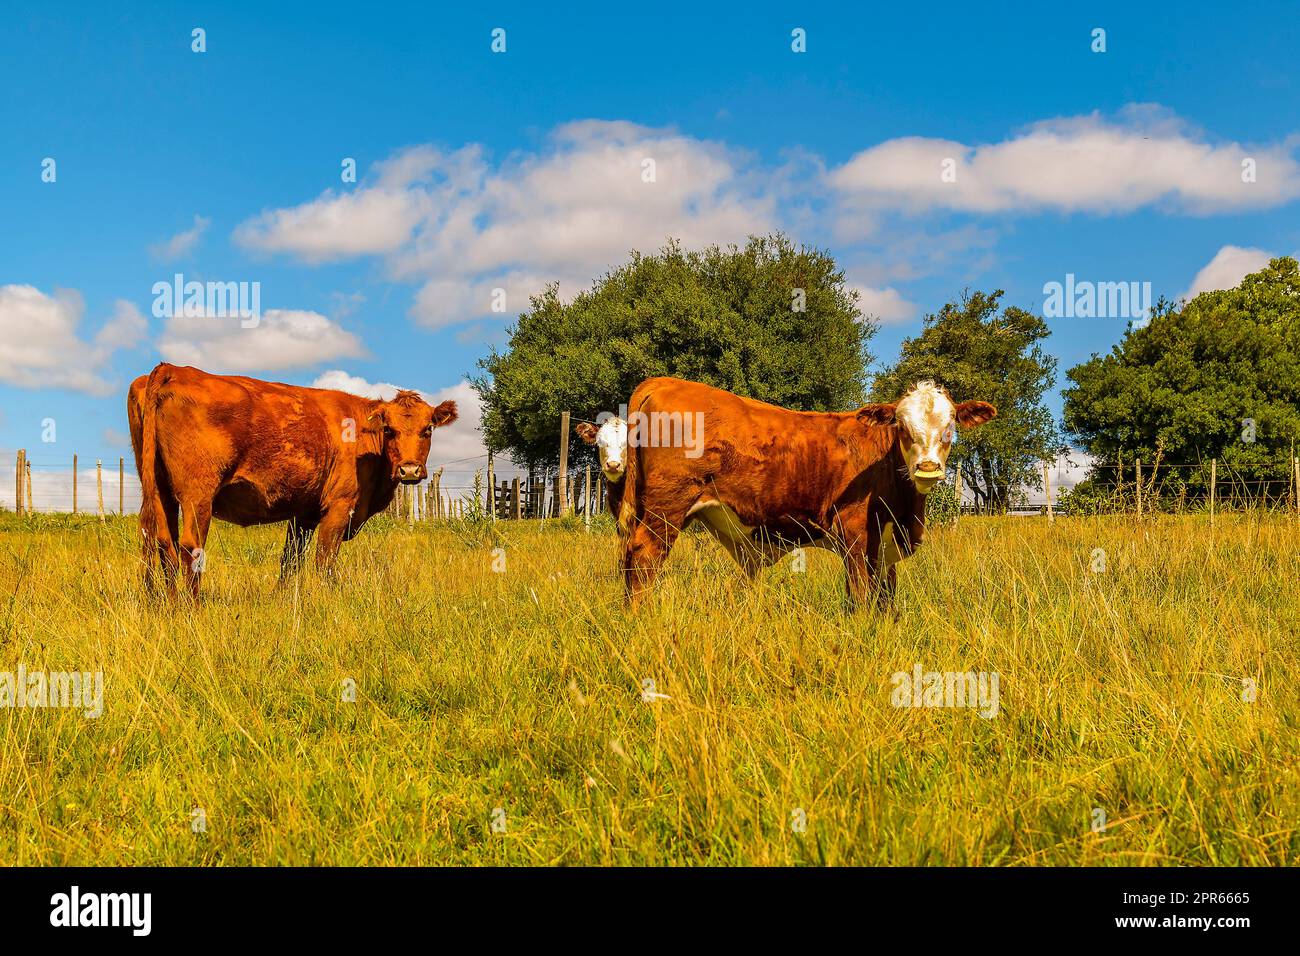 Hereford breed cows standing free at countryside landscape, maldonado, uruguay Stock Photo